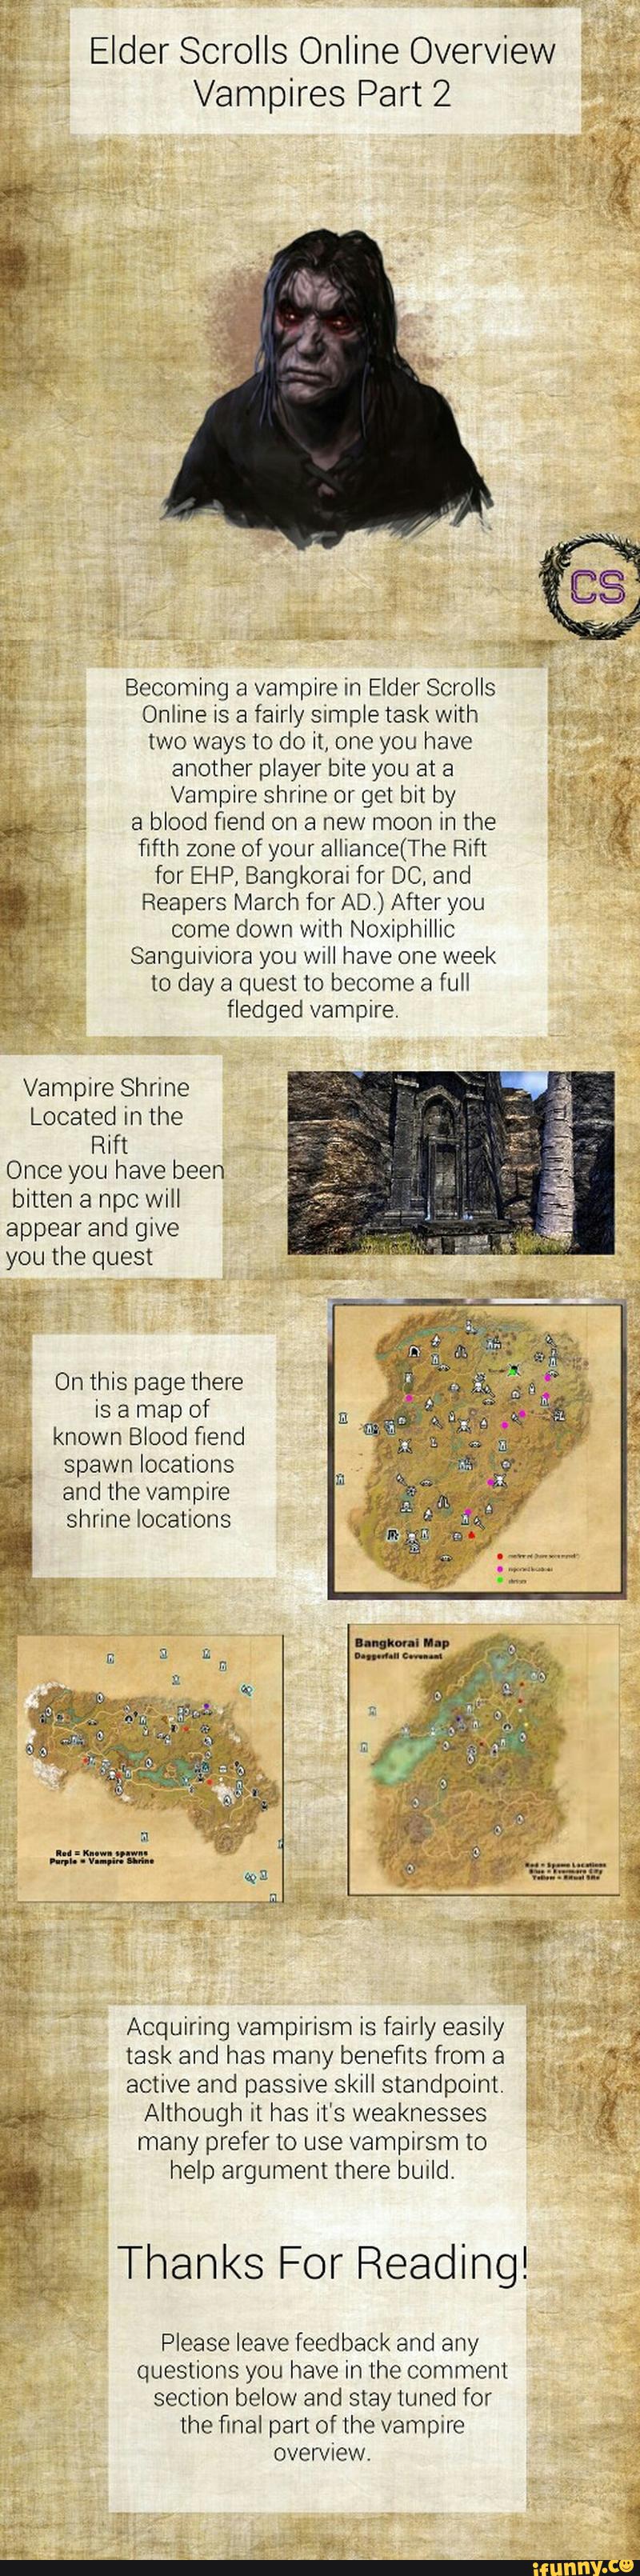 Eso Vampire Shrine Reapers March Eso Reapers March Skyshards. 